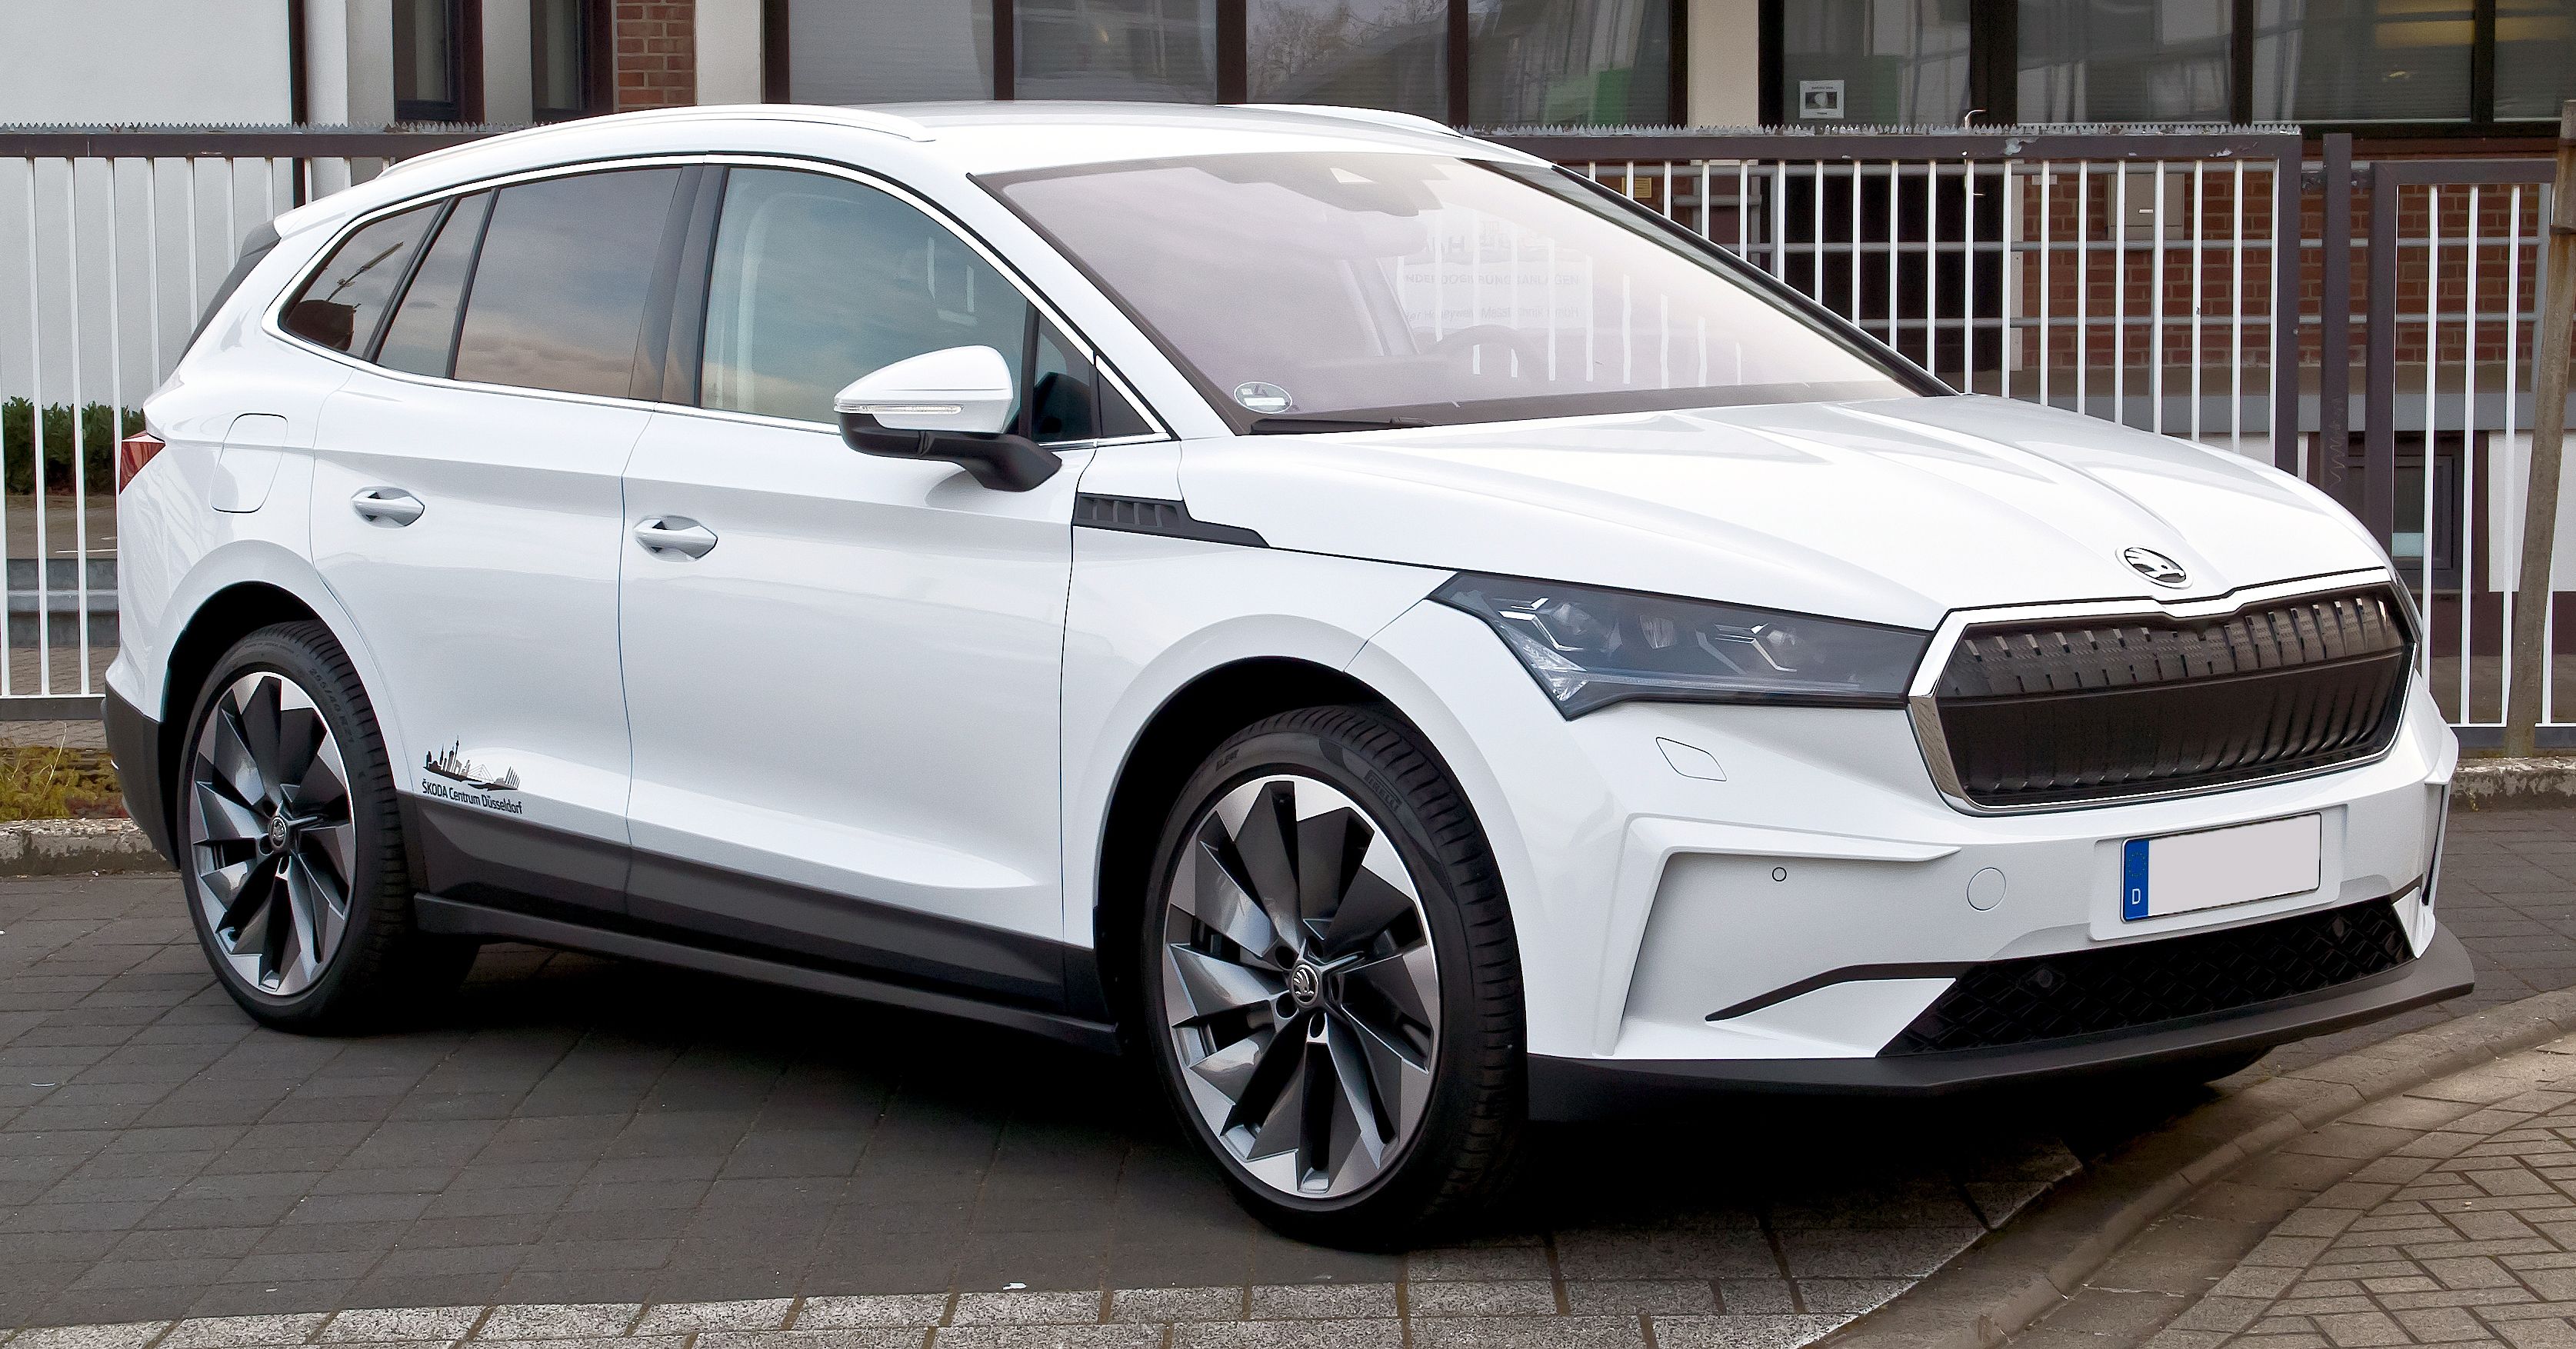 The 10 Best Electric Family Cars To Buy In 2022